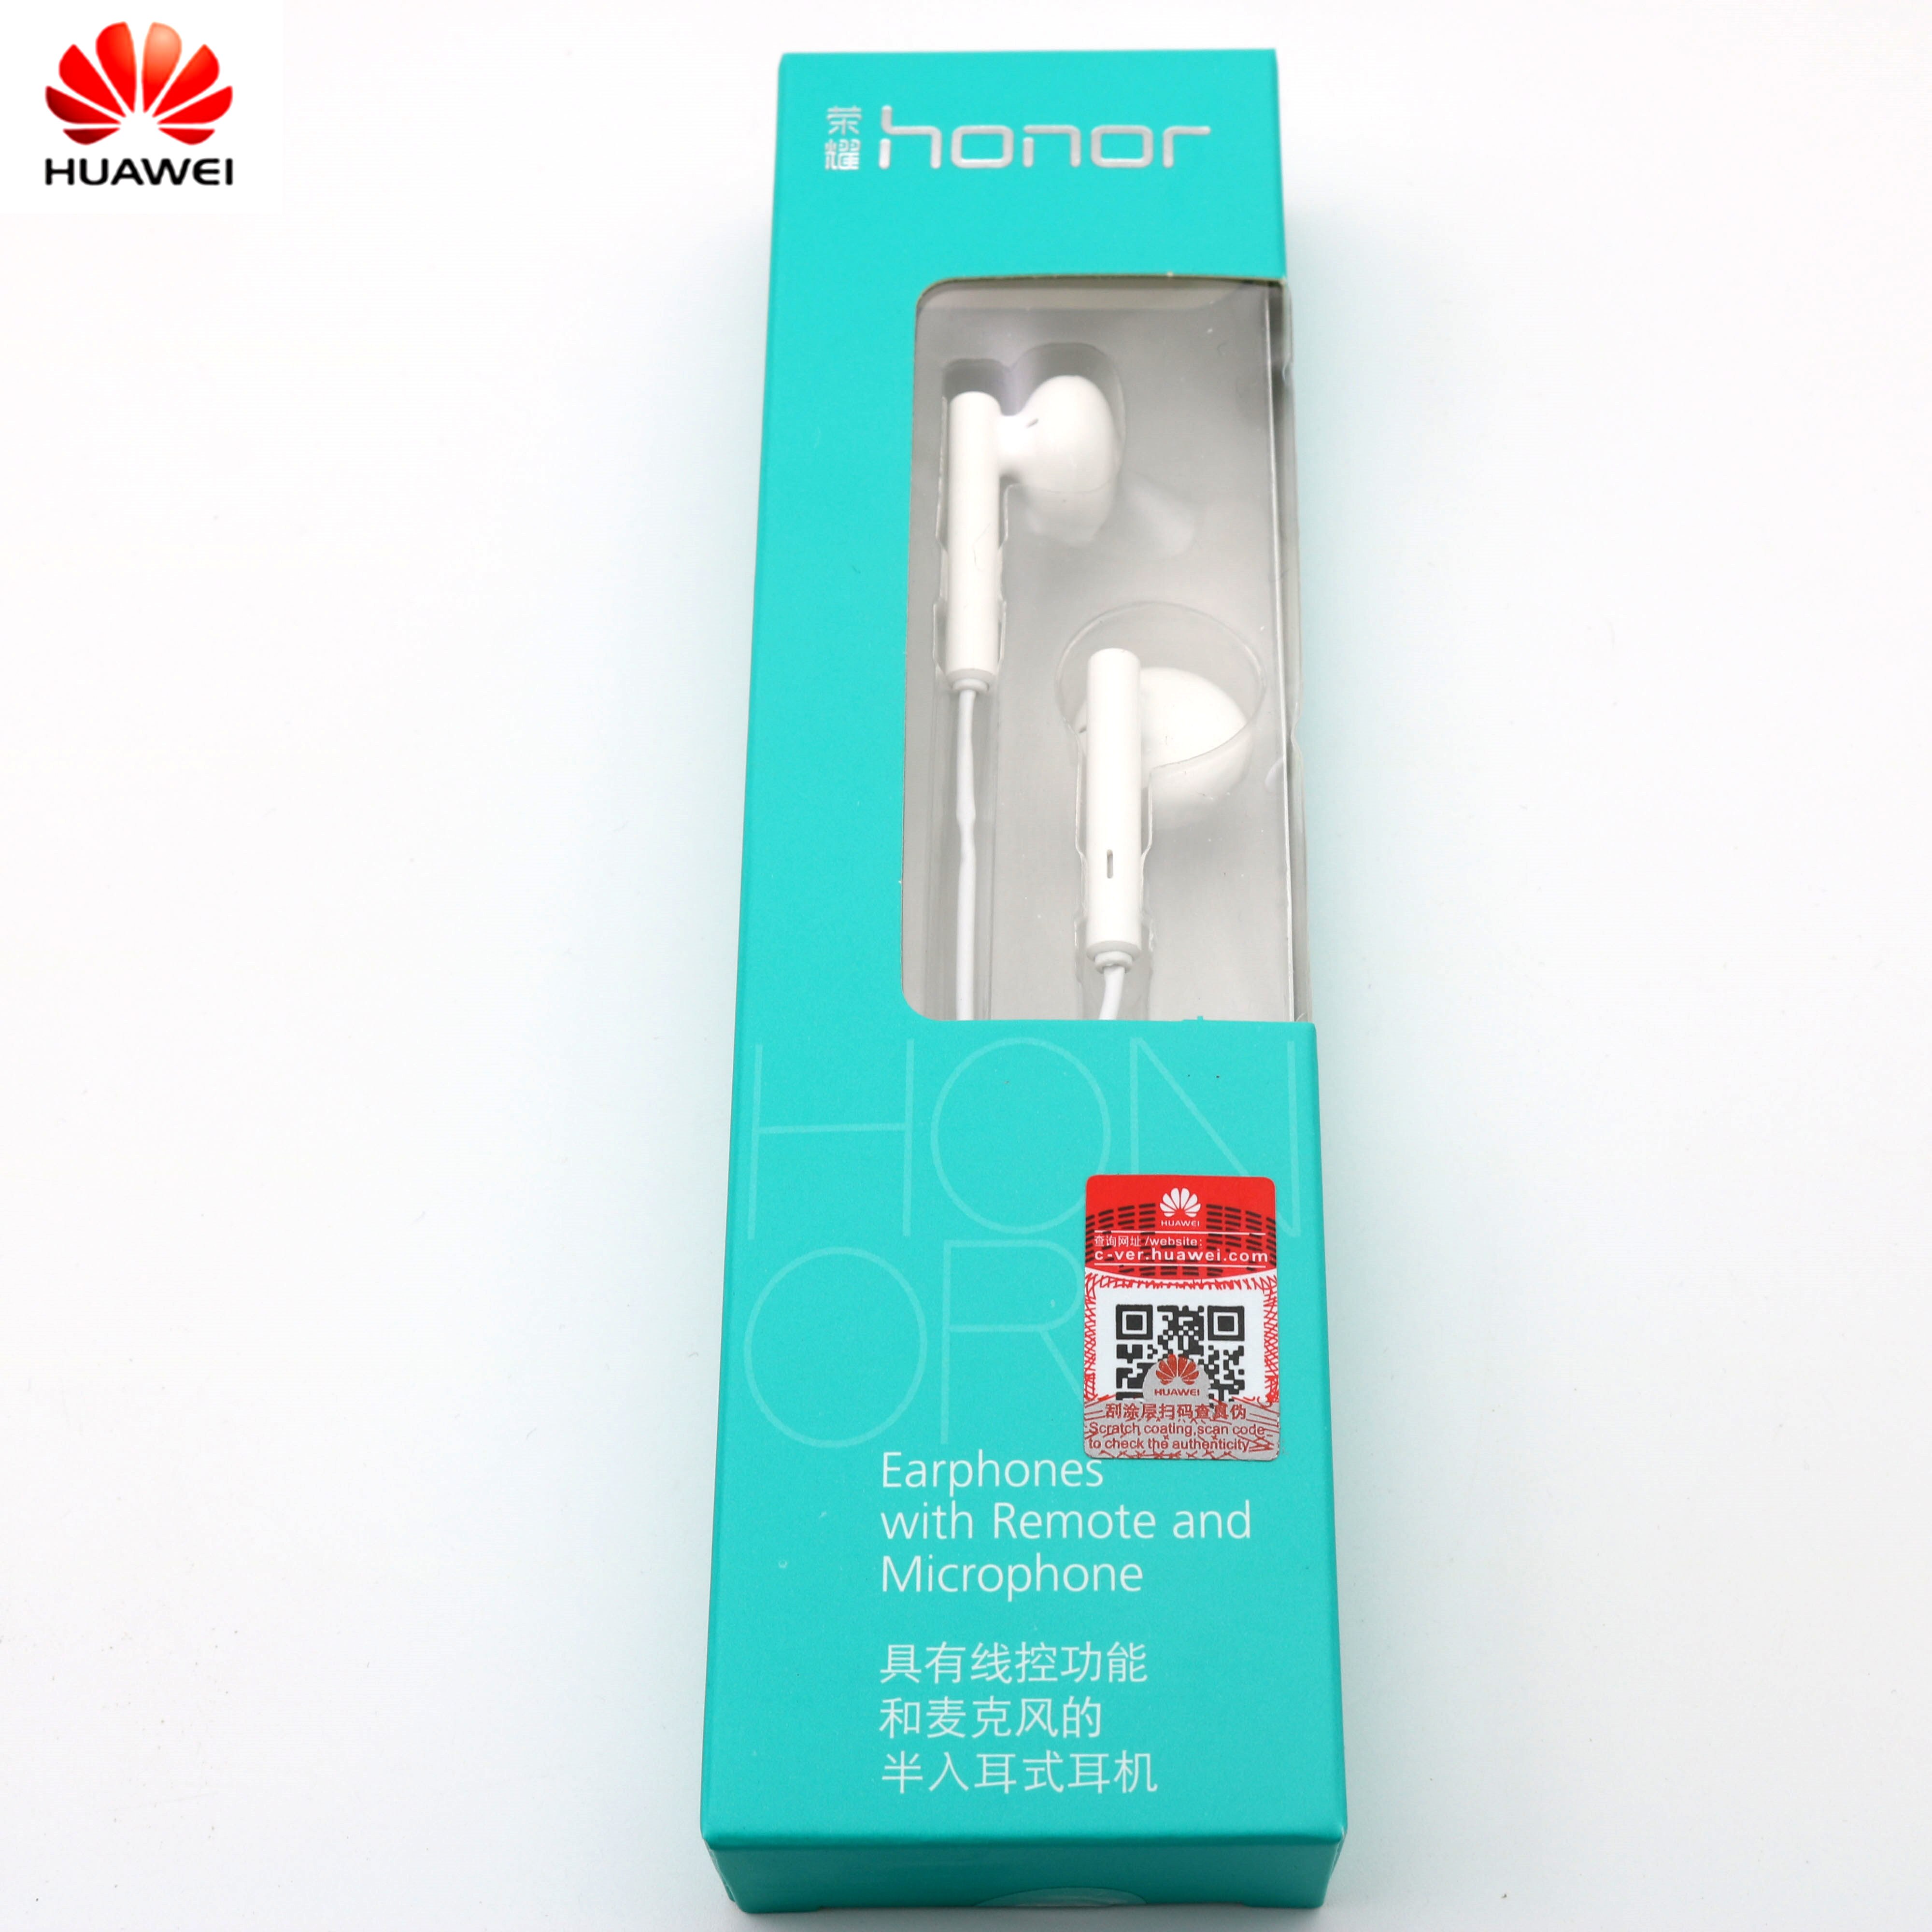 Original Huawei Honor AM115 Earphone with 3.5mm in Ear Earbuds Headset Wired Control for Honor 8 Huawei P10 P9 P8 Mate9 phone: With packing